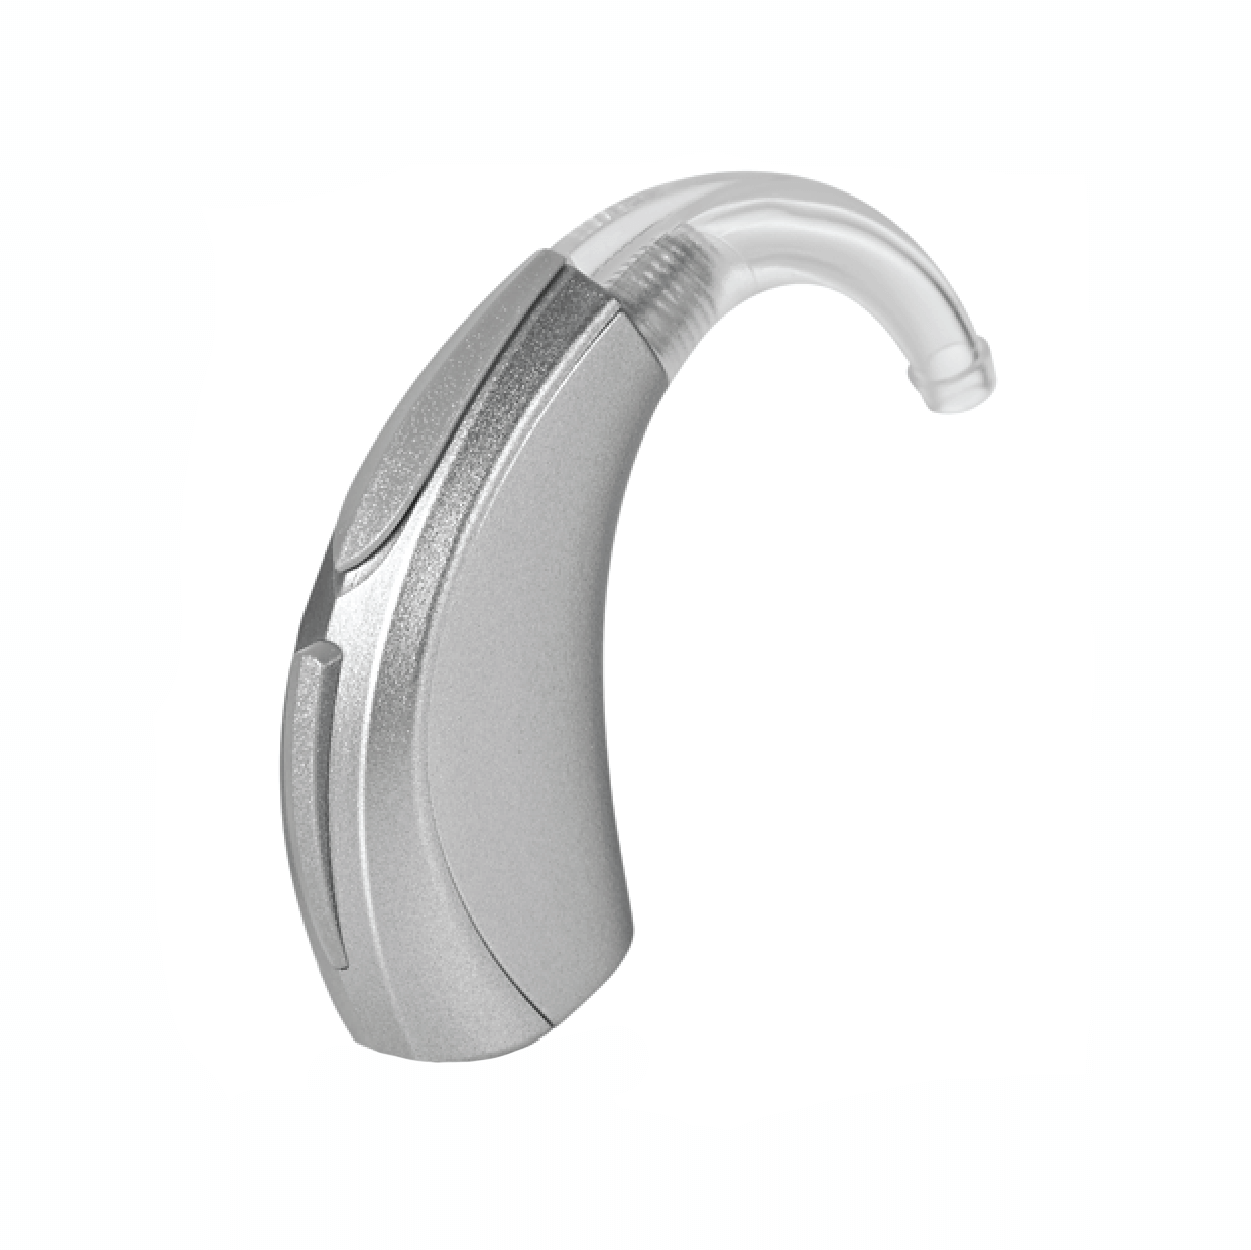 Behind-the-Ear hearing aids